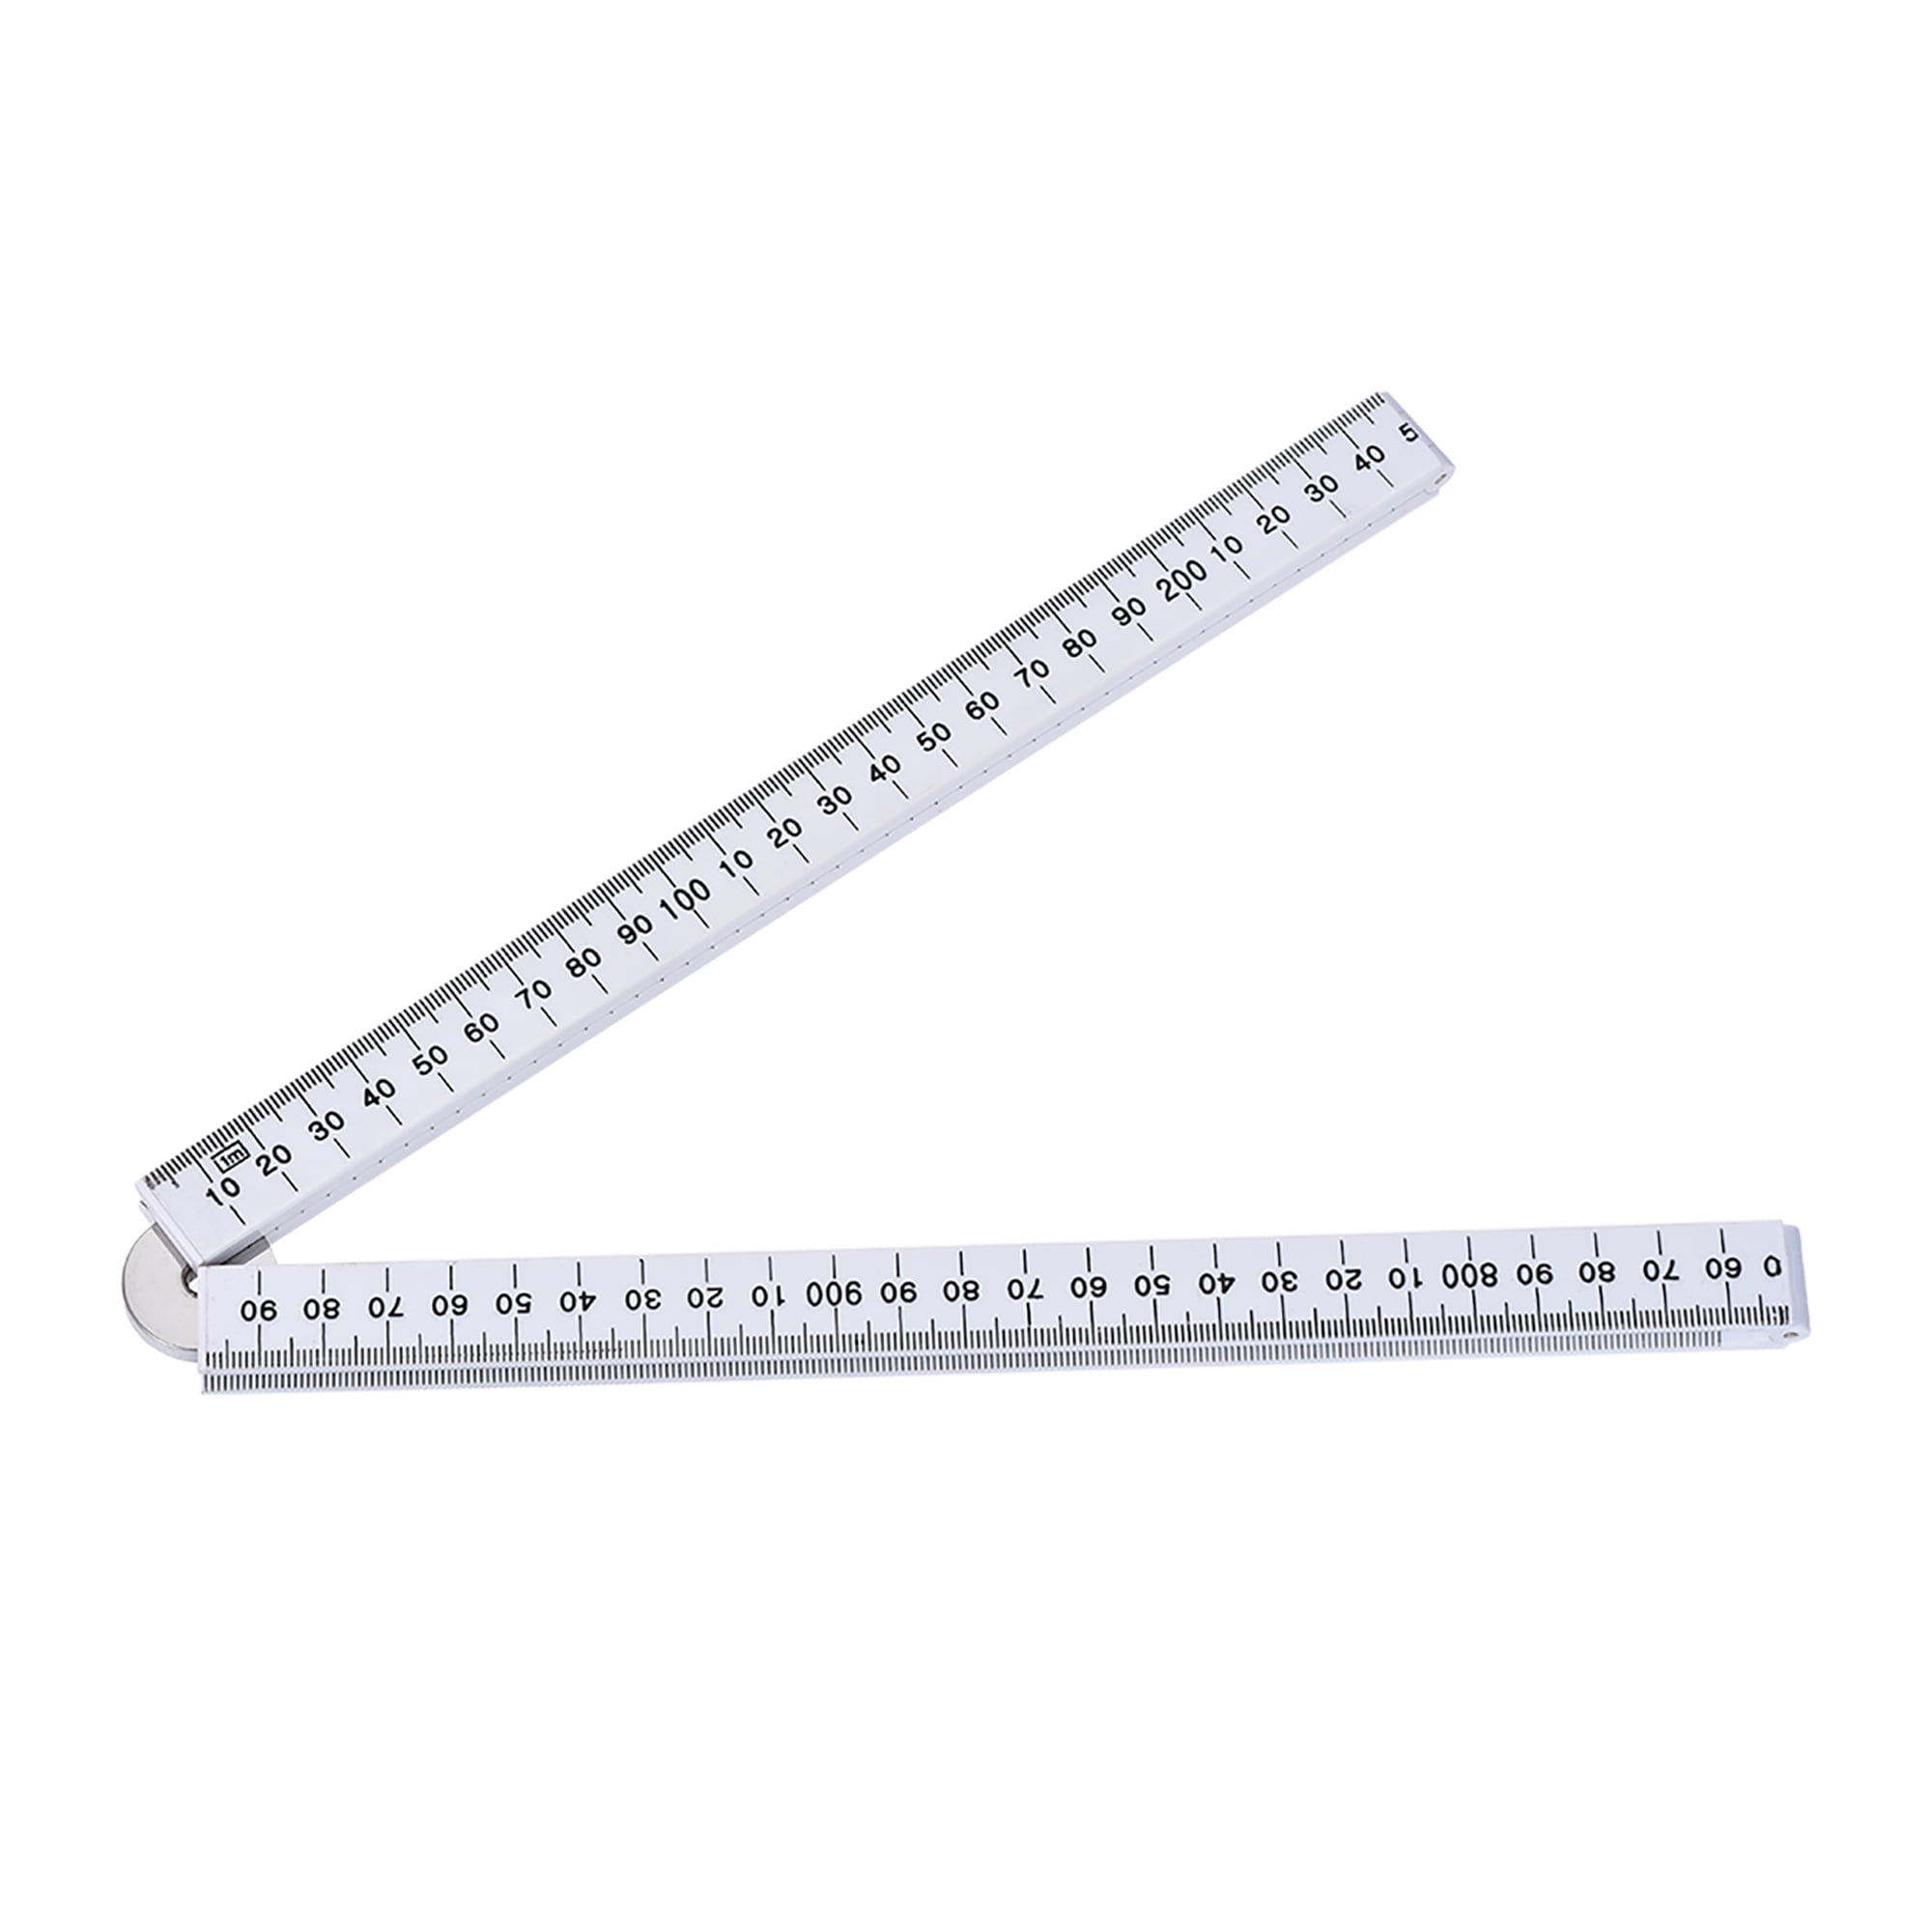 Uxcell Folding Ruler 100cm/39.37 6 Fold Metric Measuring Tool ABS for  Woodworking Engineer Yellow